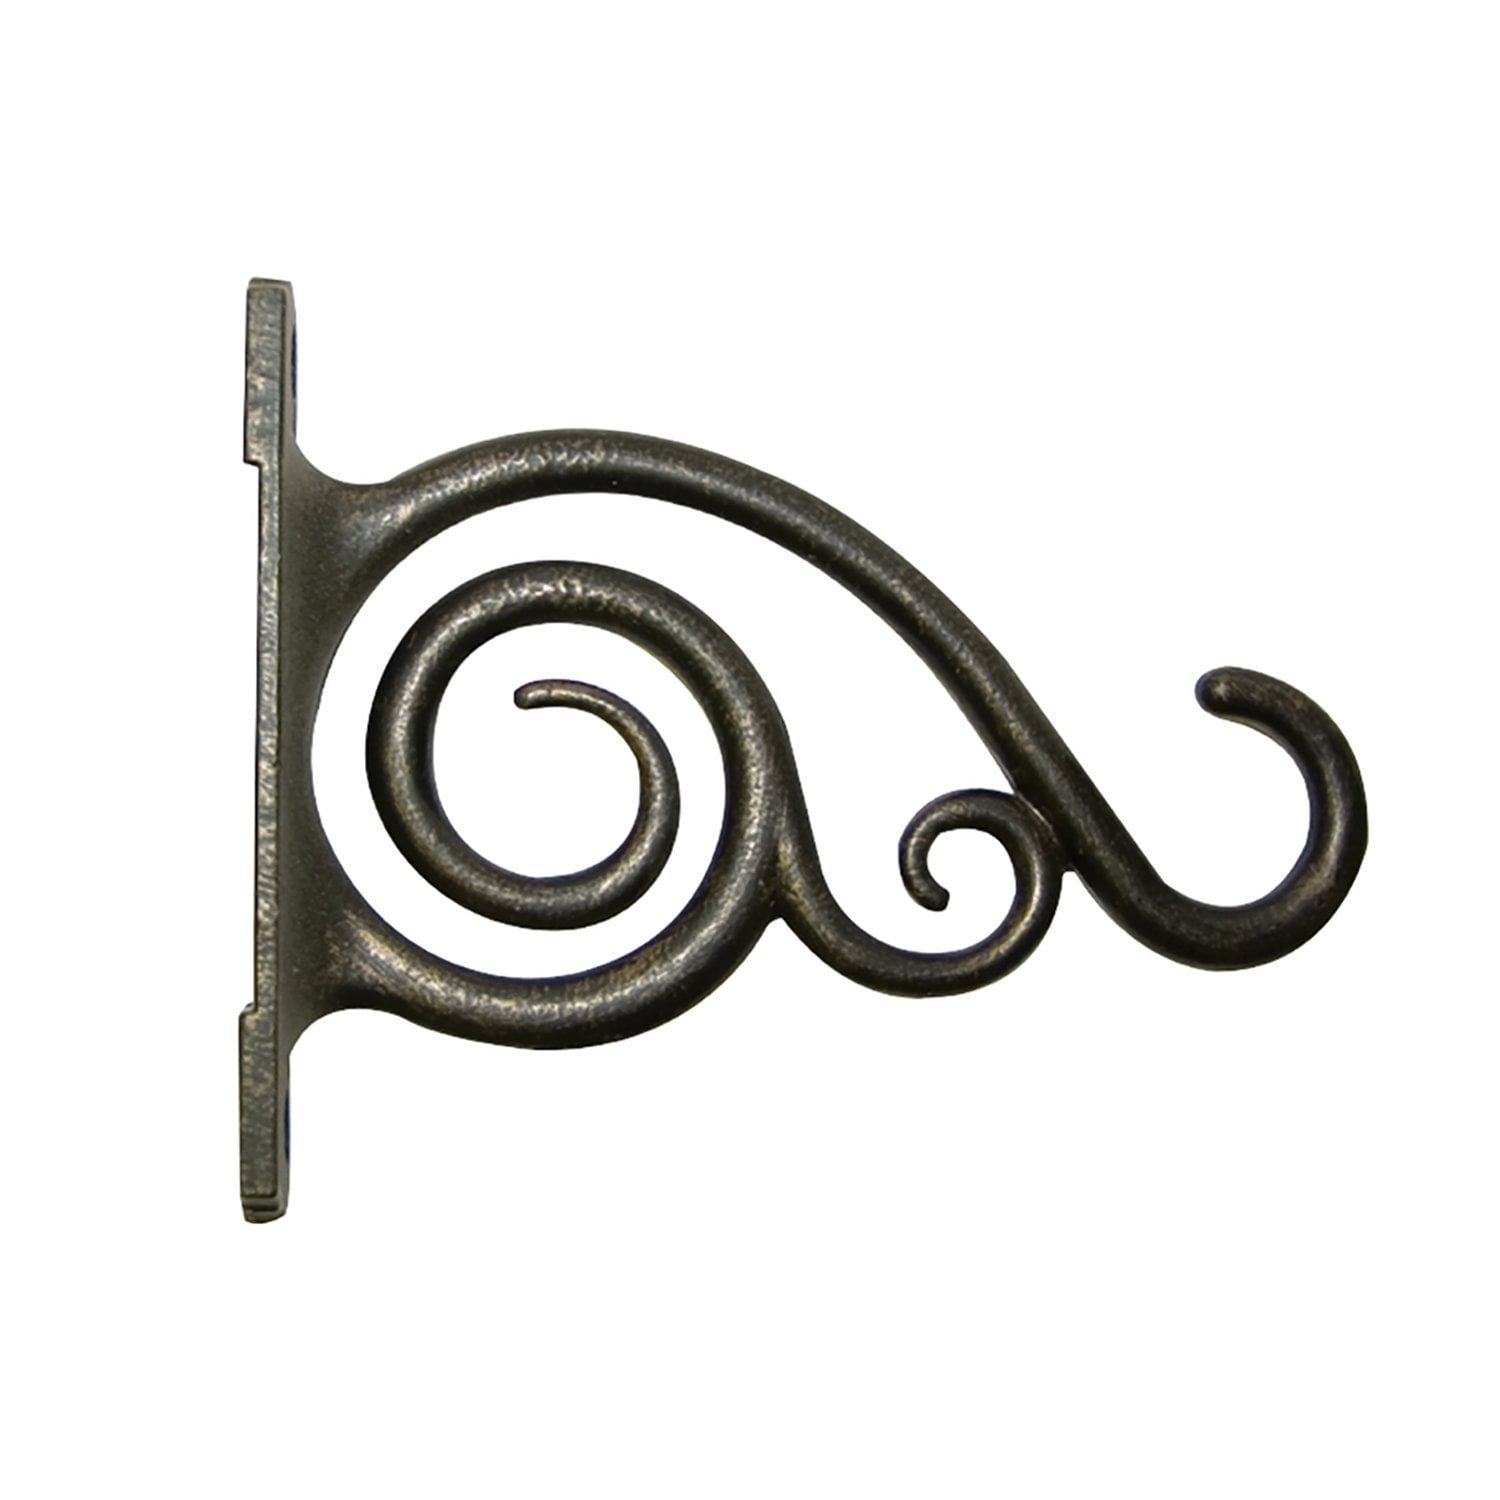 Panacea 100506642 Plant Bracket with Scroll Brushed Bronze 6" 